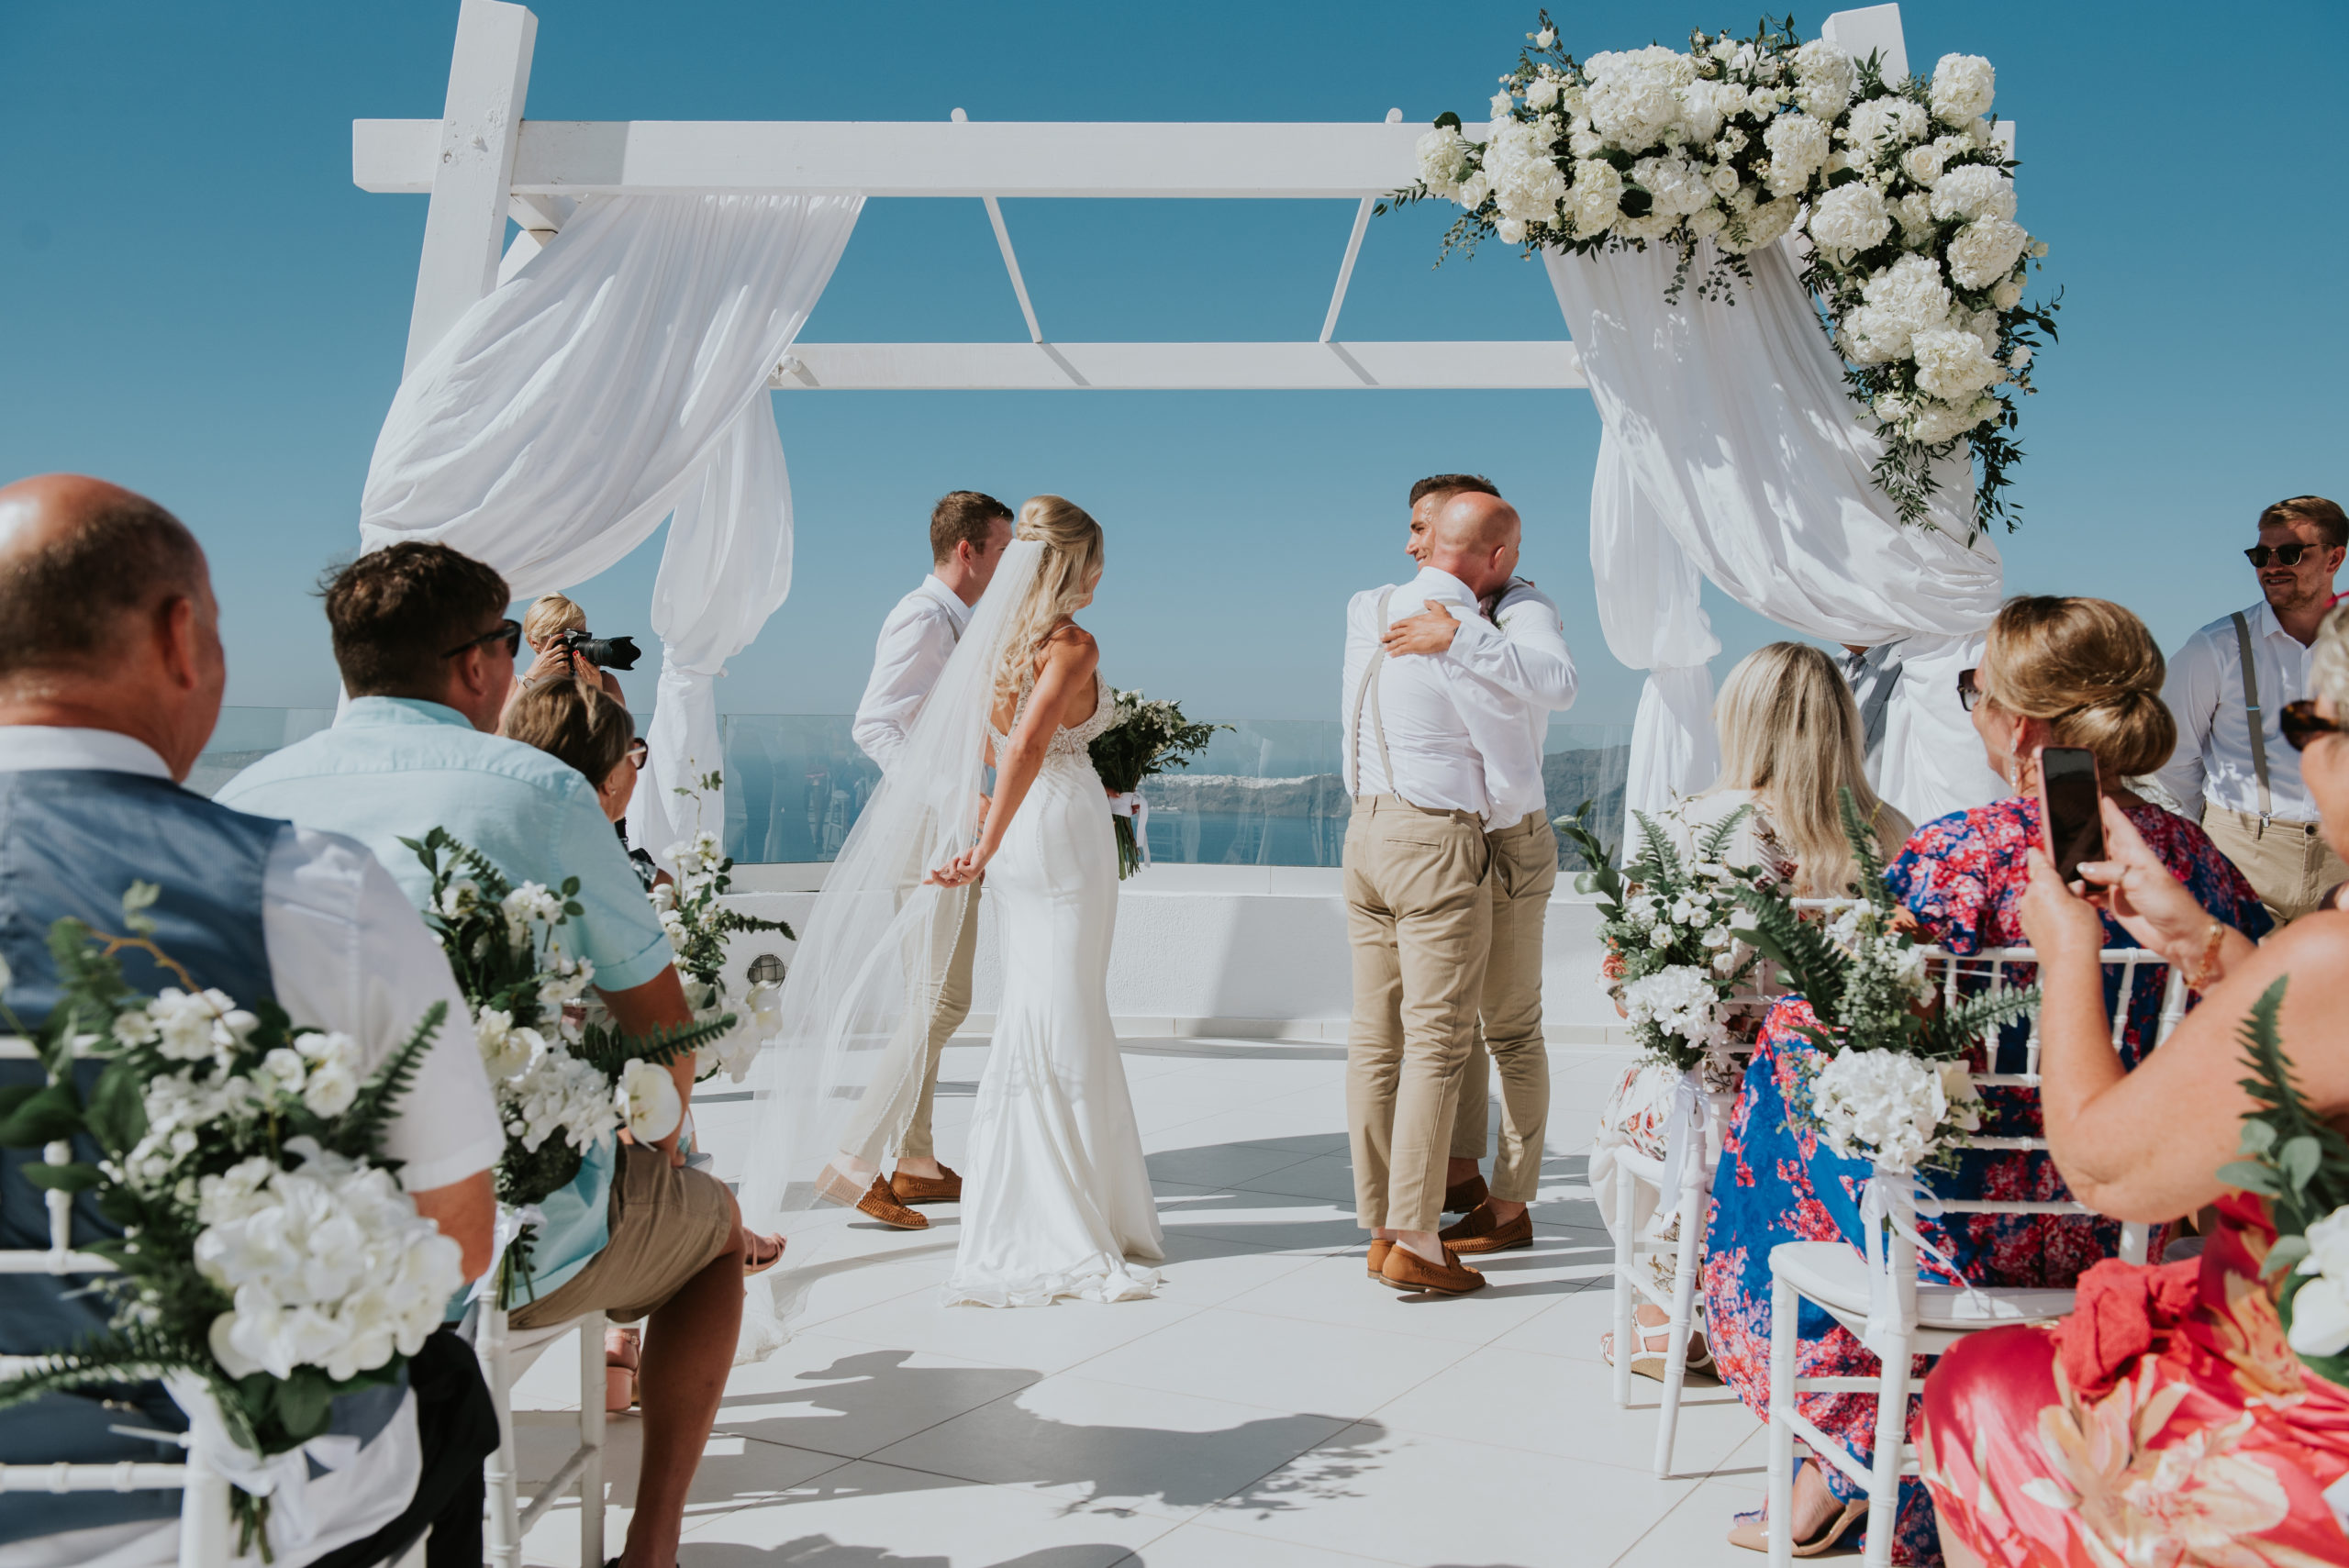 Wedding photographer Santorini: the groom hugs stepfather of the bride in front of gazebo as brides moves her veil by Ben and Vesna.